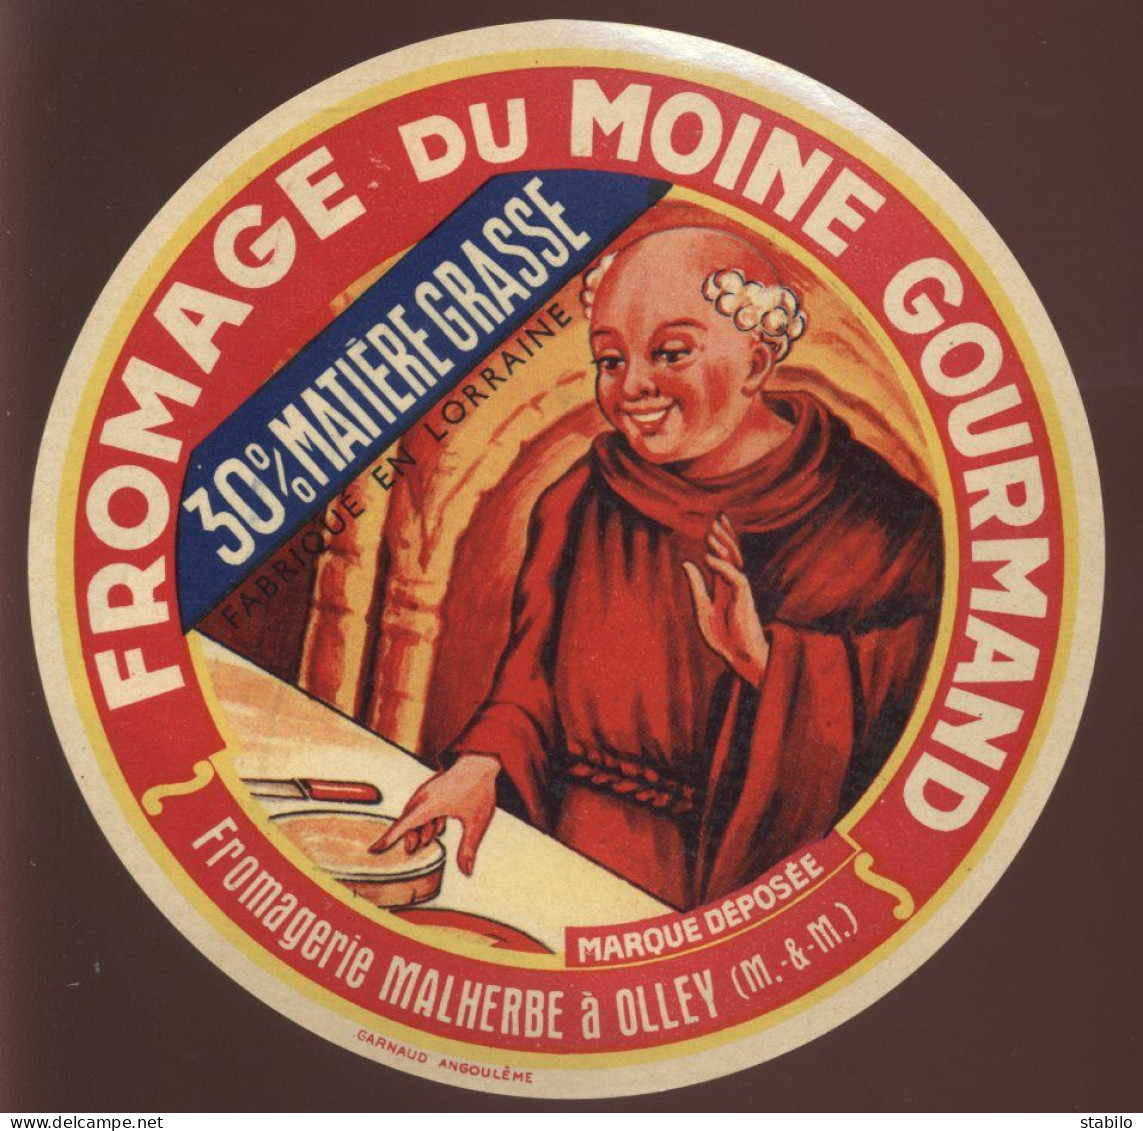 ETIQUETTE DE FROMAGE - FROMAGE DU MOINE GOURMAND - FROMAGERIE MALHERBE, OLLEY (MEURTHE-ET-MOSELLE) - Fromage